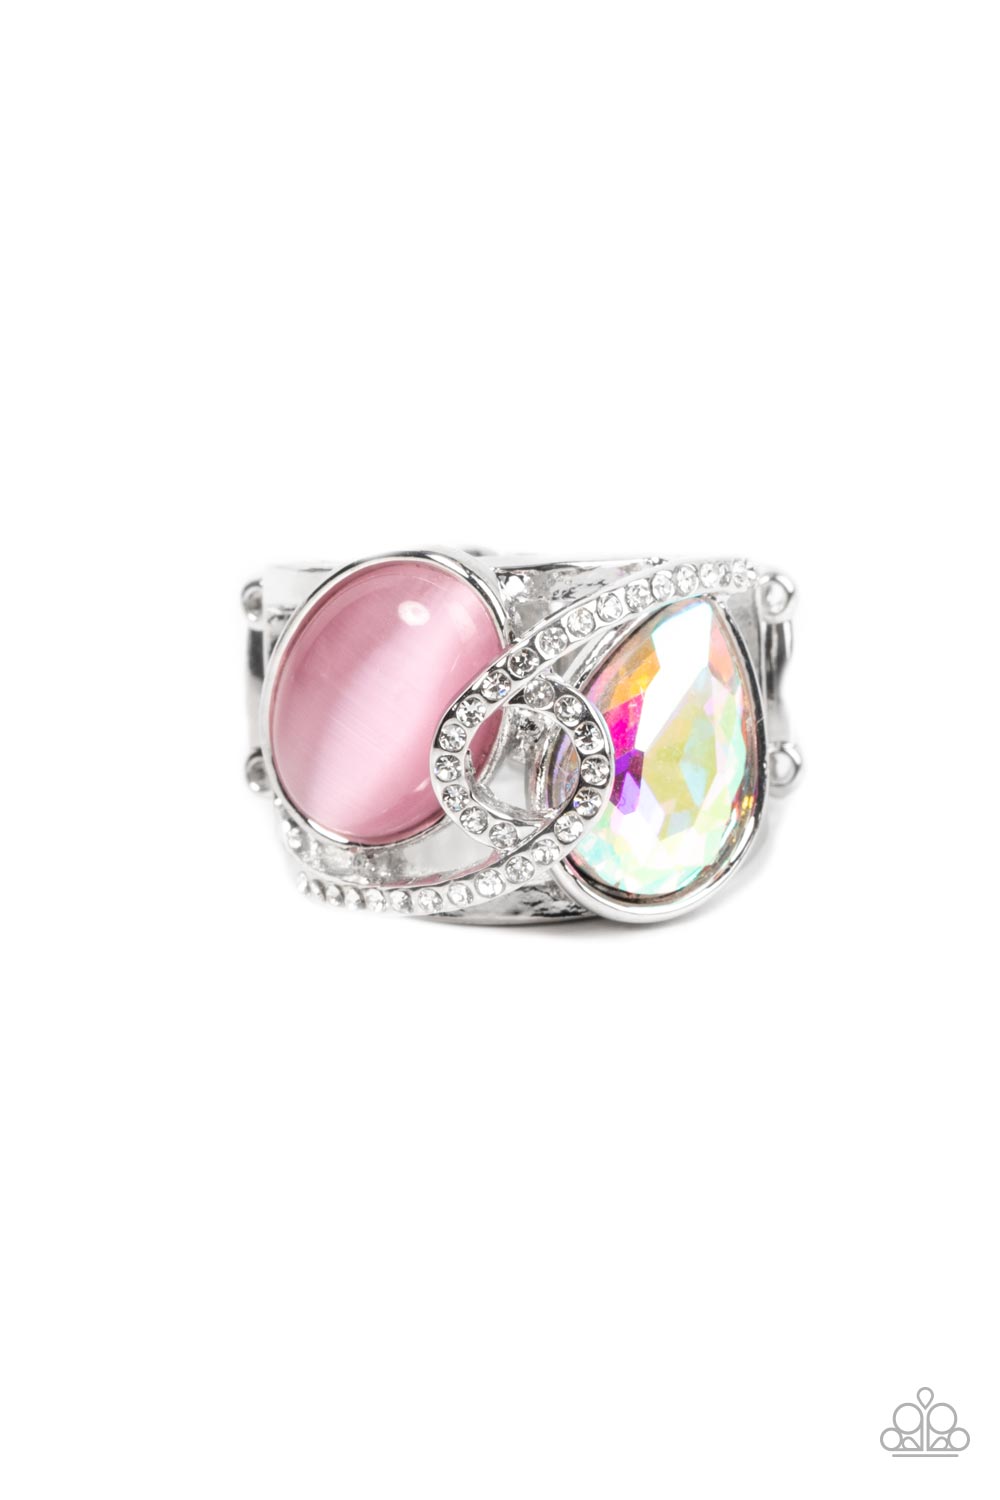 SELFIE-Indulgence Pink Ring - Paparazzi Accessories  A white rhinestone dotted silver ribbon loops and slants over a tilted pink cat's eye stone and iridescent teardrop gem, culminating into a stellar centerpiece. Features a stretchy band for a flexible fit.  Sold as one individual ring.